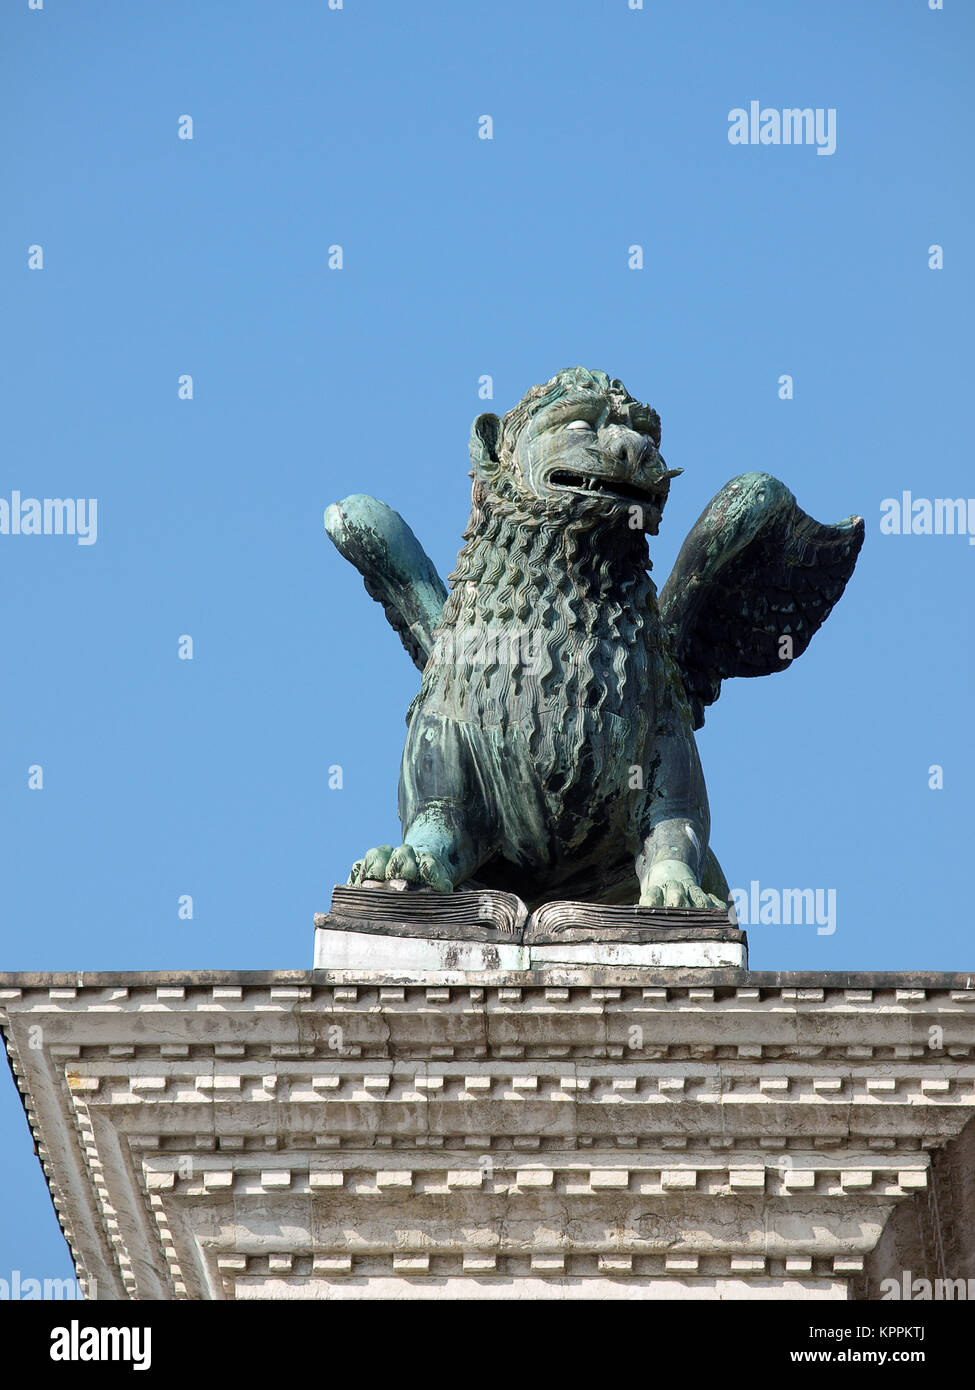 Chimera Sculpture on the Piazetta - Venice. A Chimera, in Greek mythology, was a fire-breathing monster. It could be part lion, part goat, and part se Stock Photo